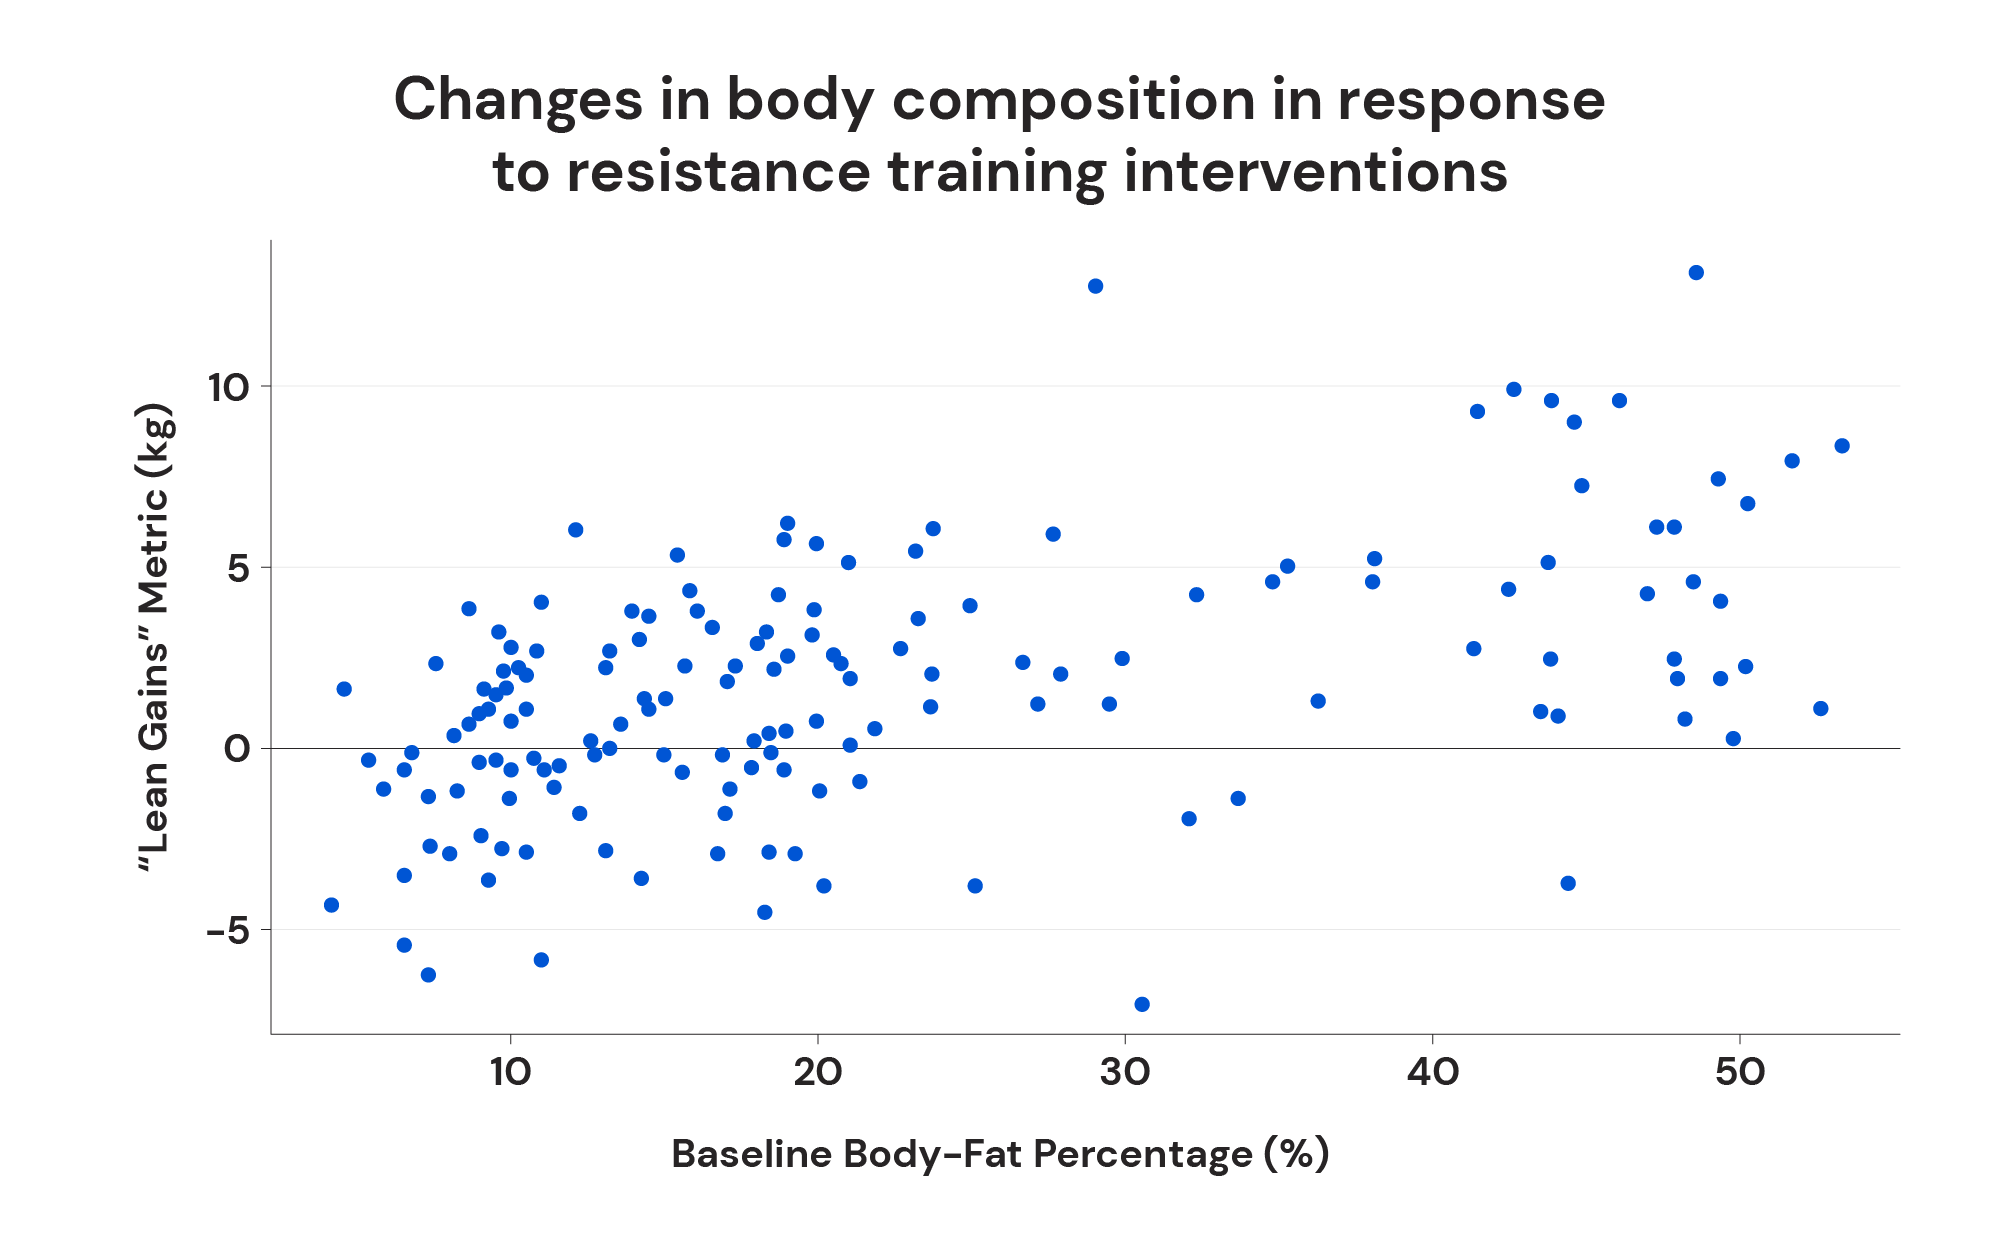 Changes in body composition in response to resistance training interventions